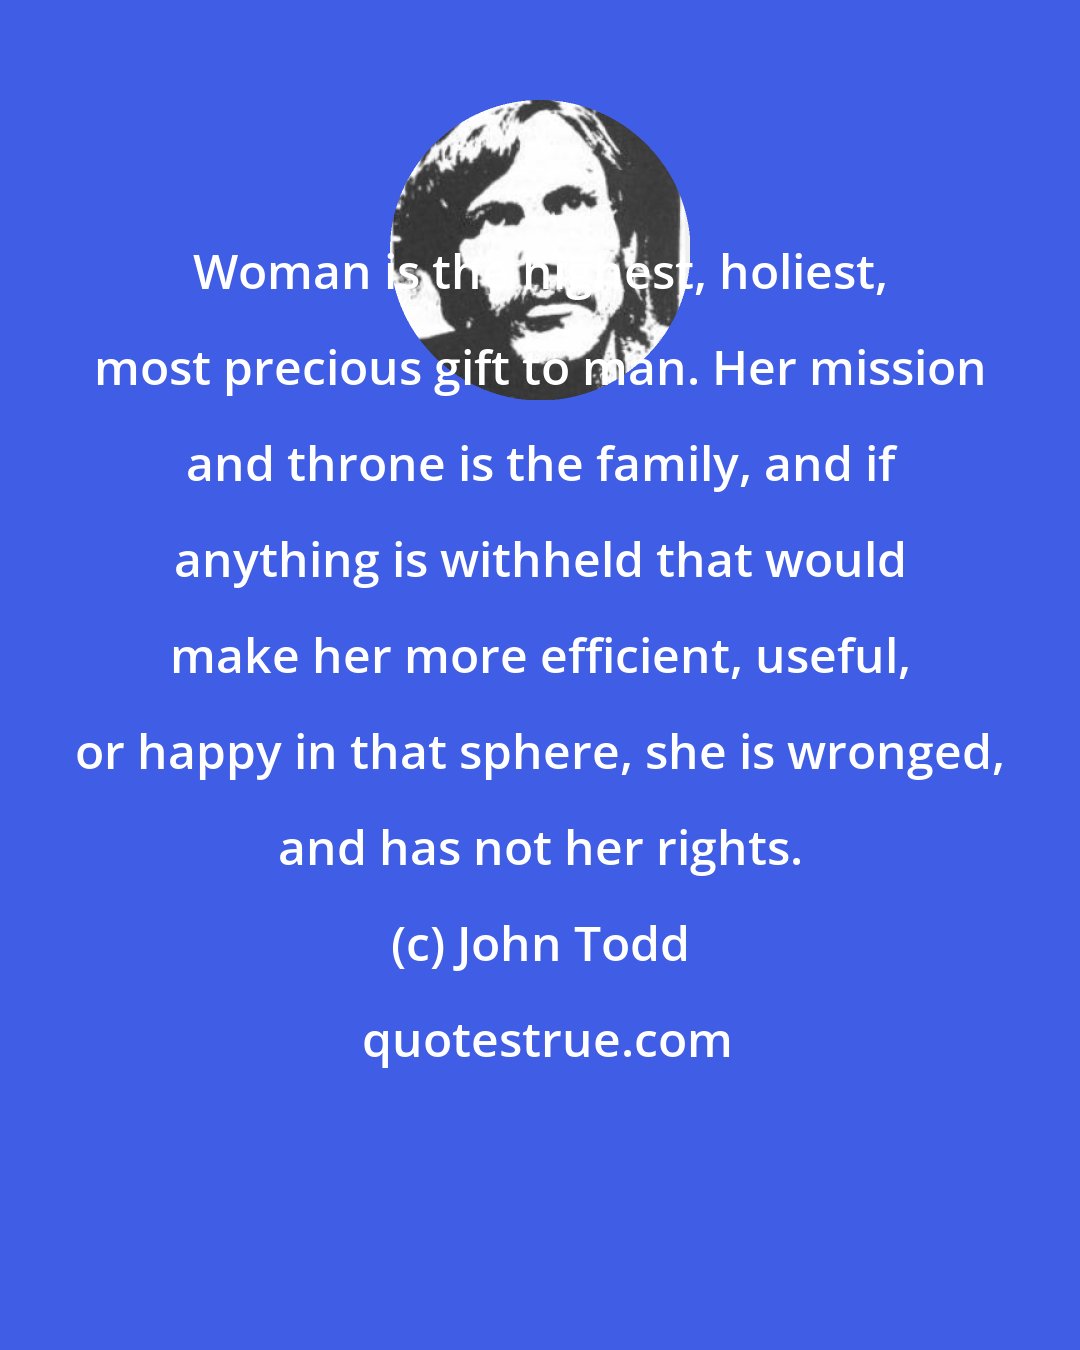 John Todd: Woman is the highest, holiest, most precious gift to man. Her mission and throne is the family, and if anything is withheld that would make her more efficient, useful, or happy in that sphere, she is wronged, and has not her rights.